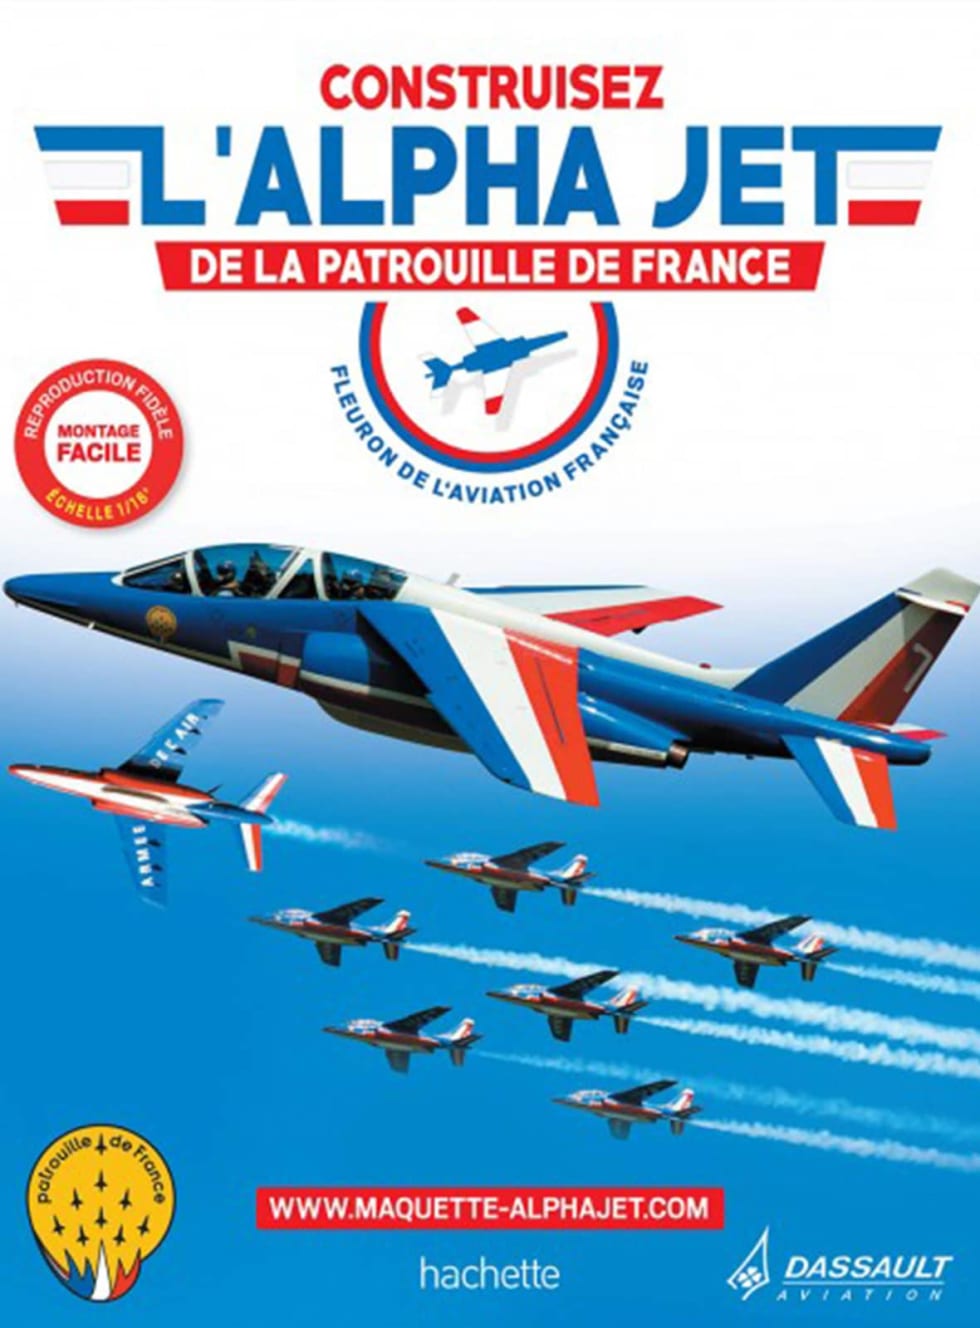 Build the French Aerobatic team’s Alpha Jet, by Hachette